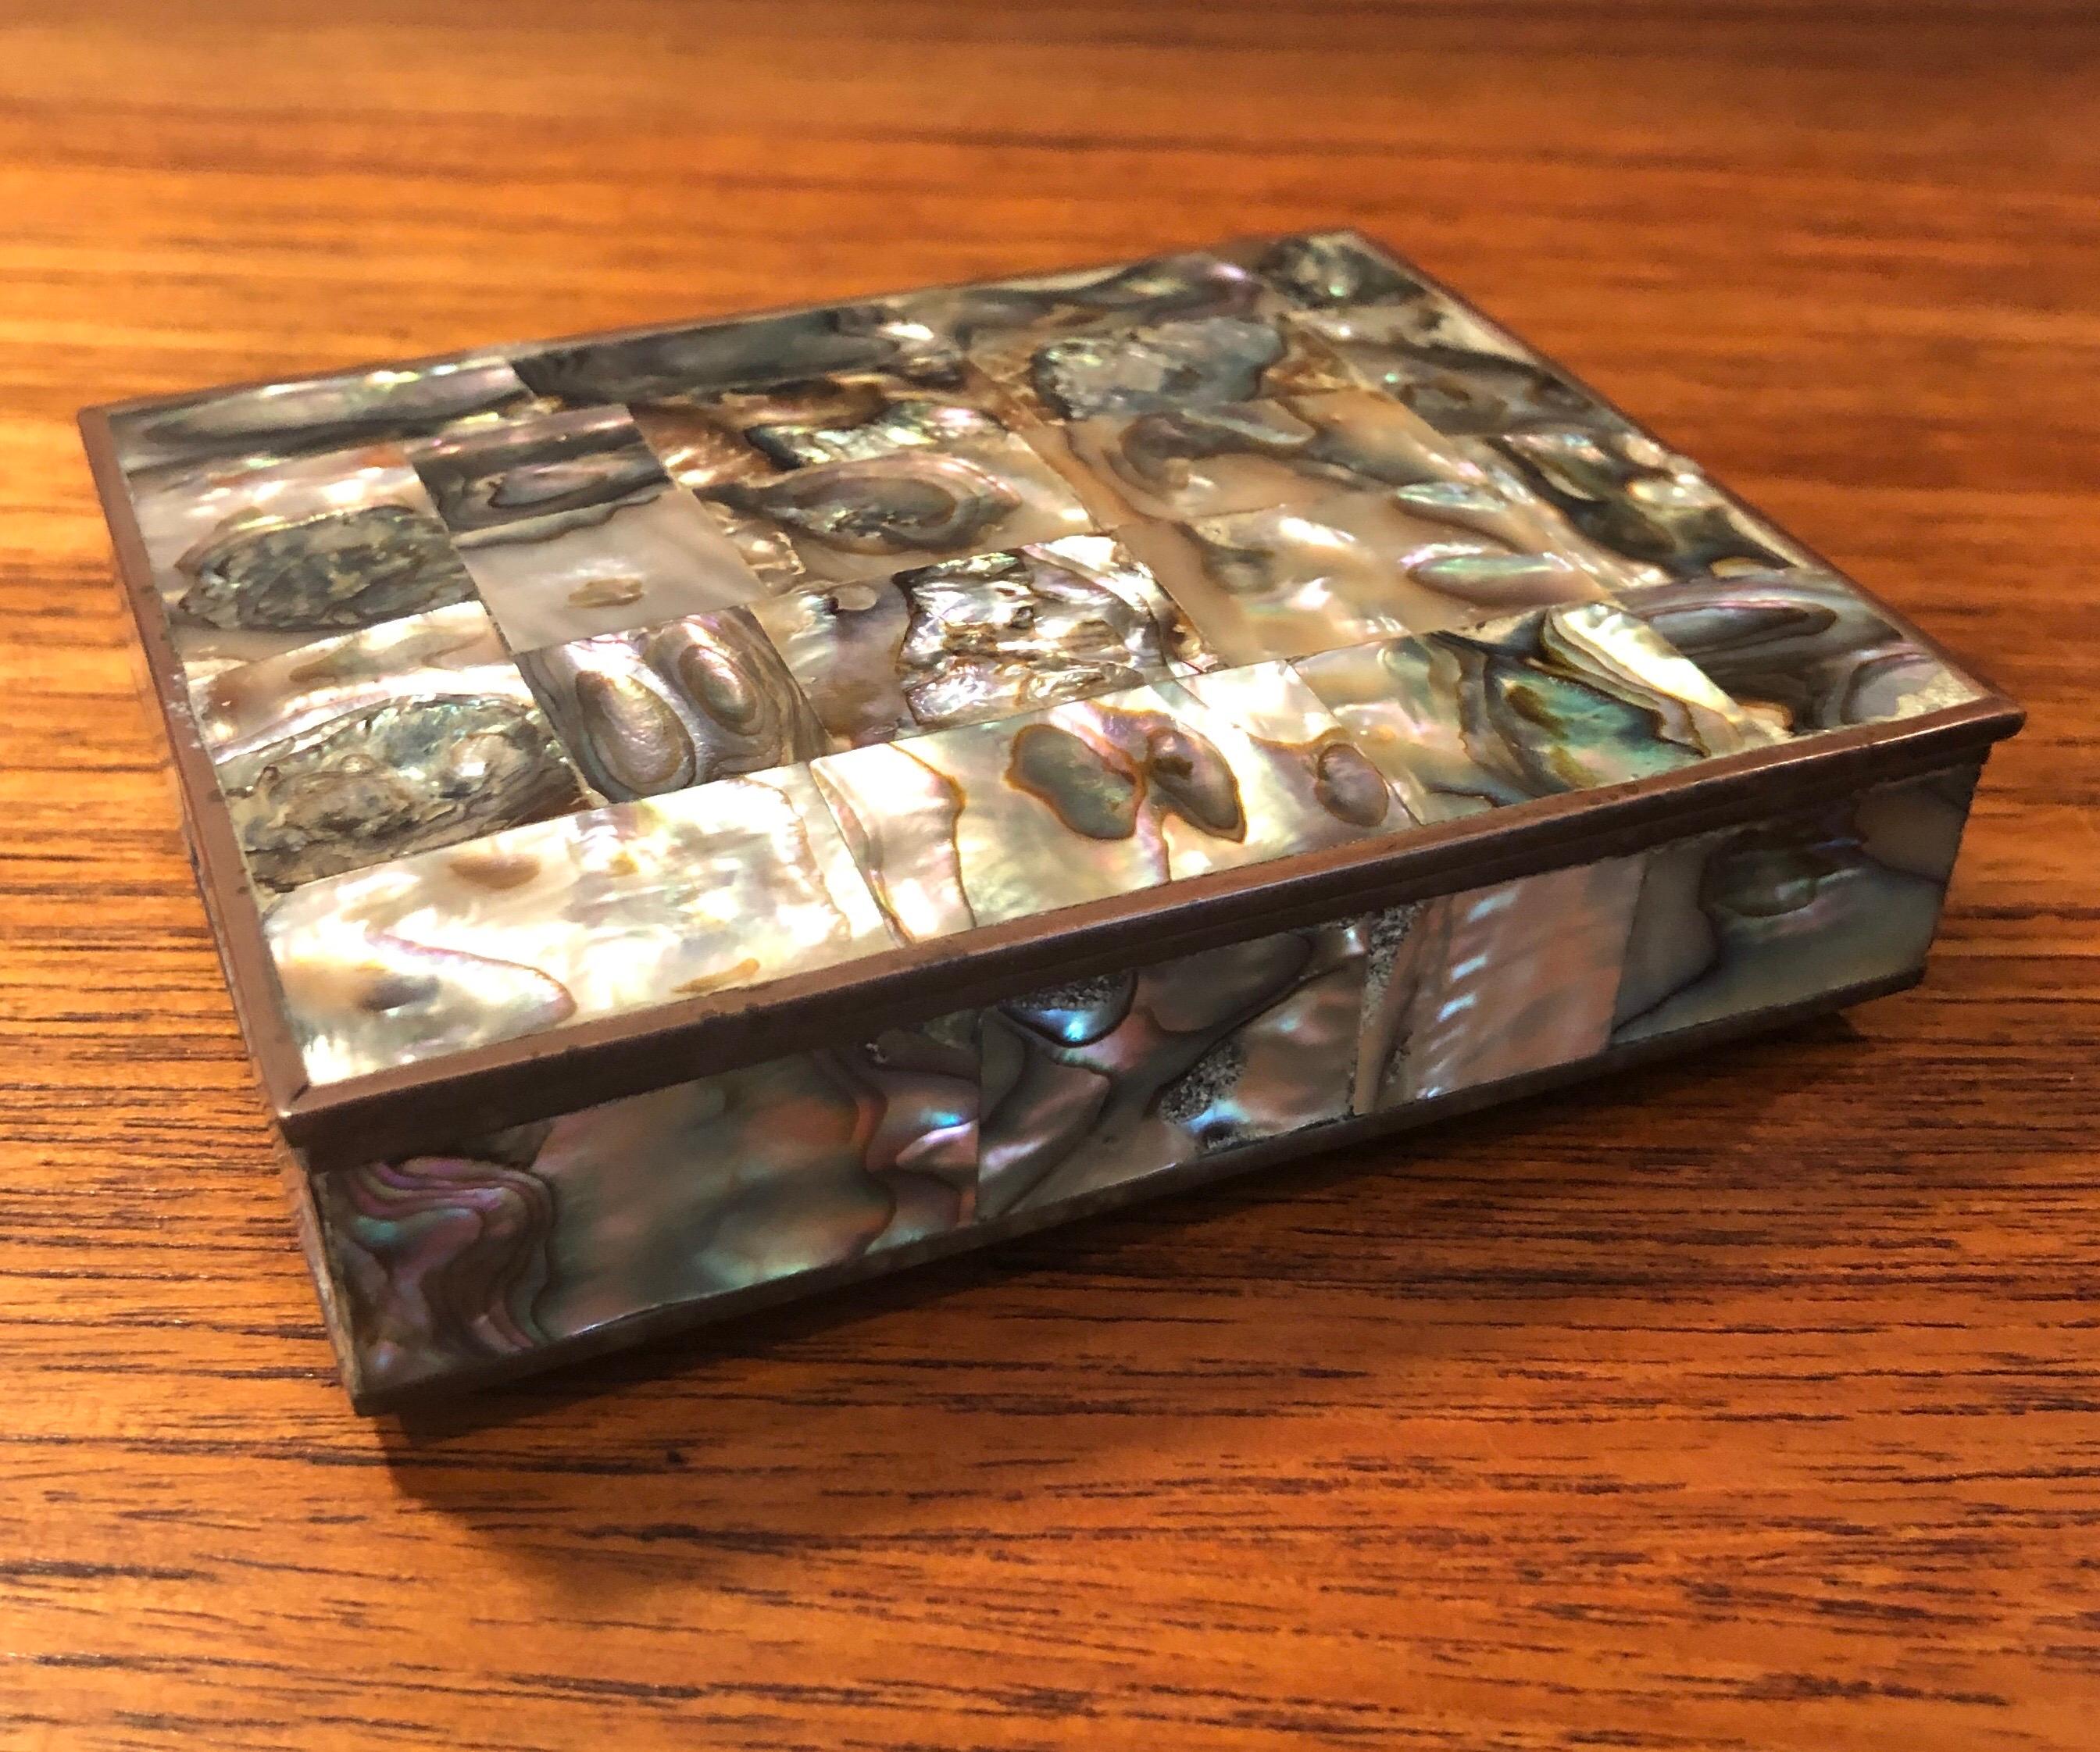 Beautiful midcentury abalone shell and brass decorative trinket box with hard wood lining made in Mexico in the style of Los Castillios, circa 1960s. The piece is stamped on the underside “Made in Mexico” in Spanish and measures 4.25